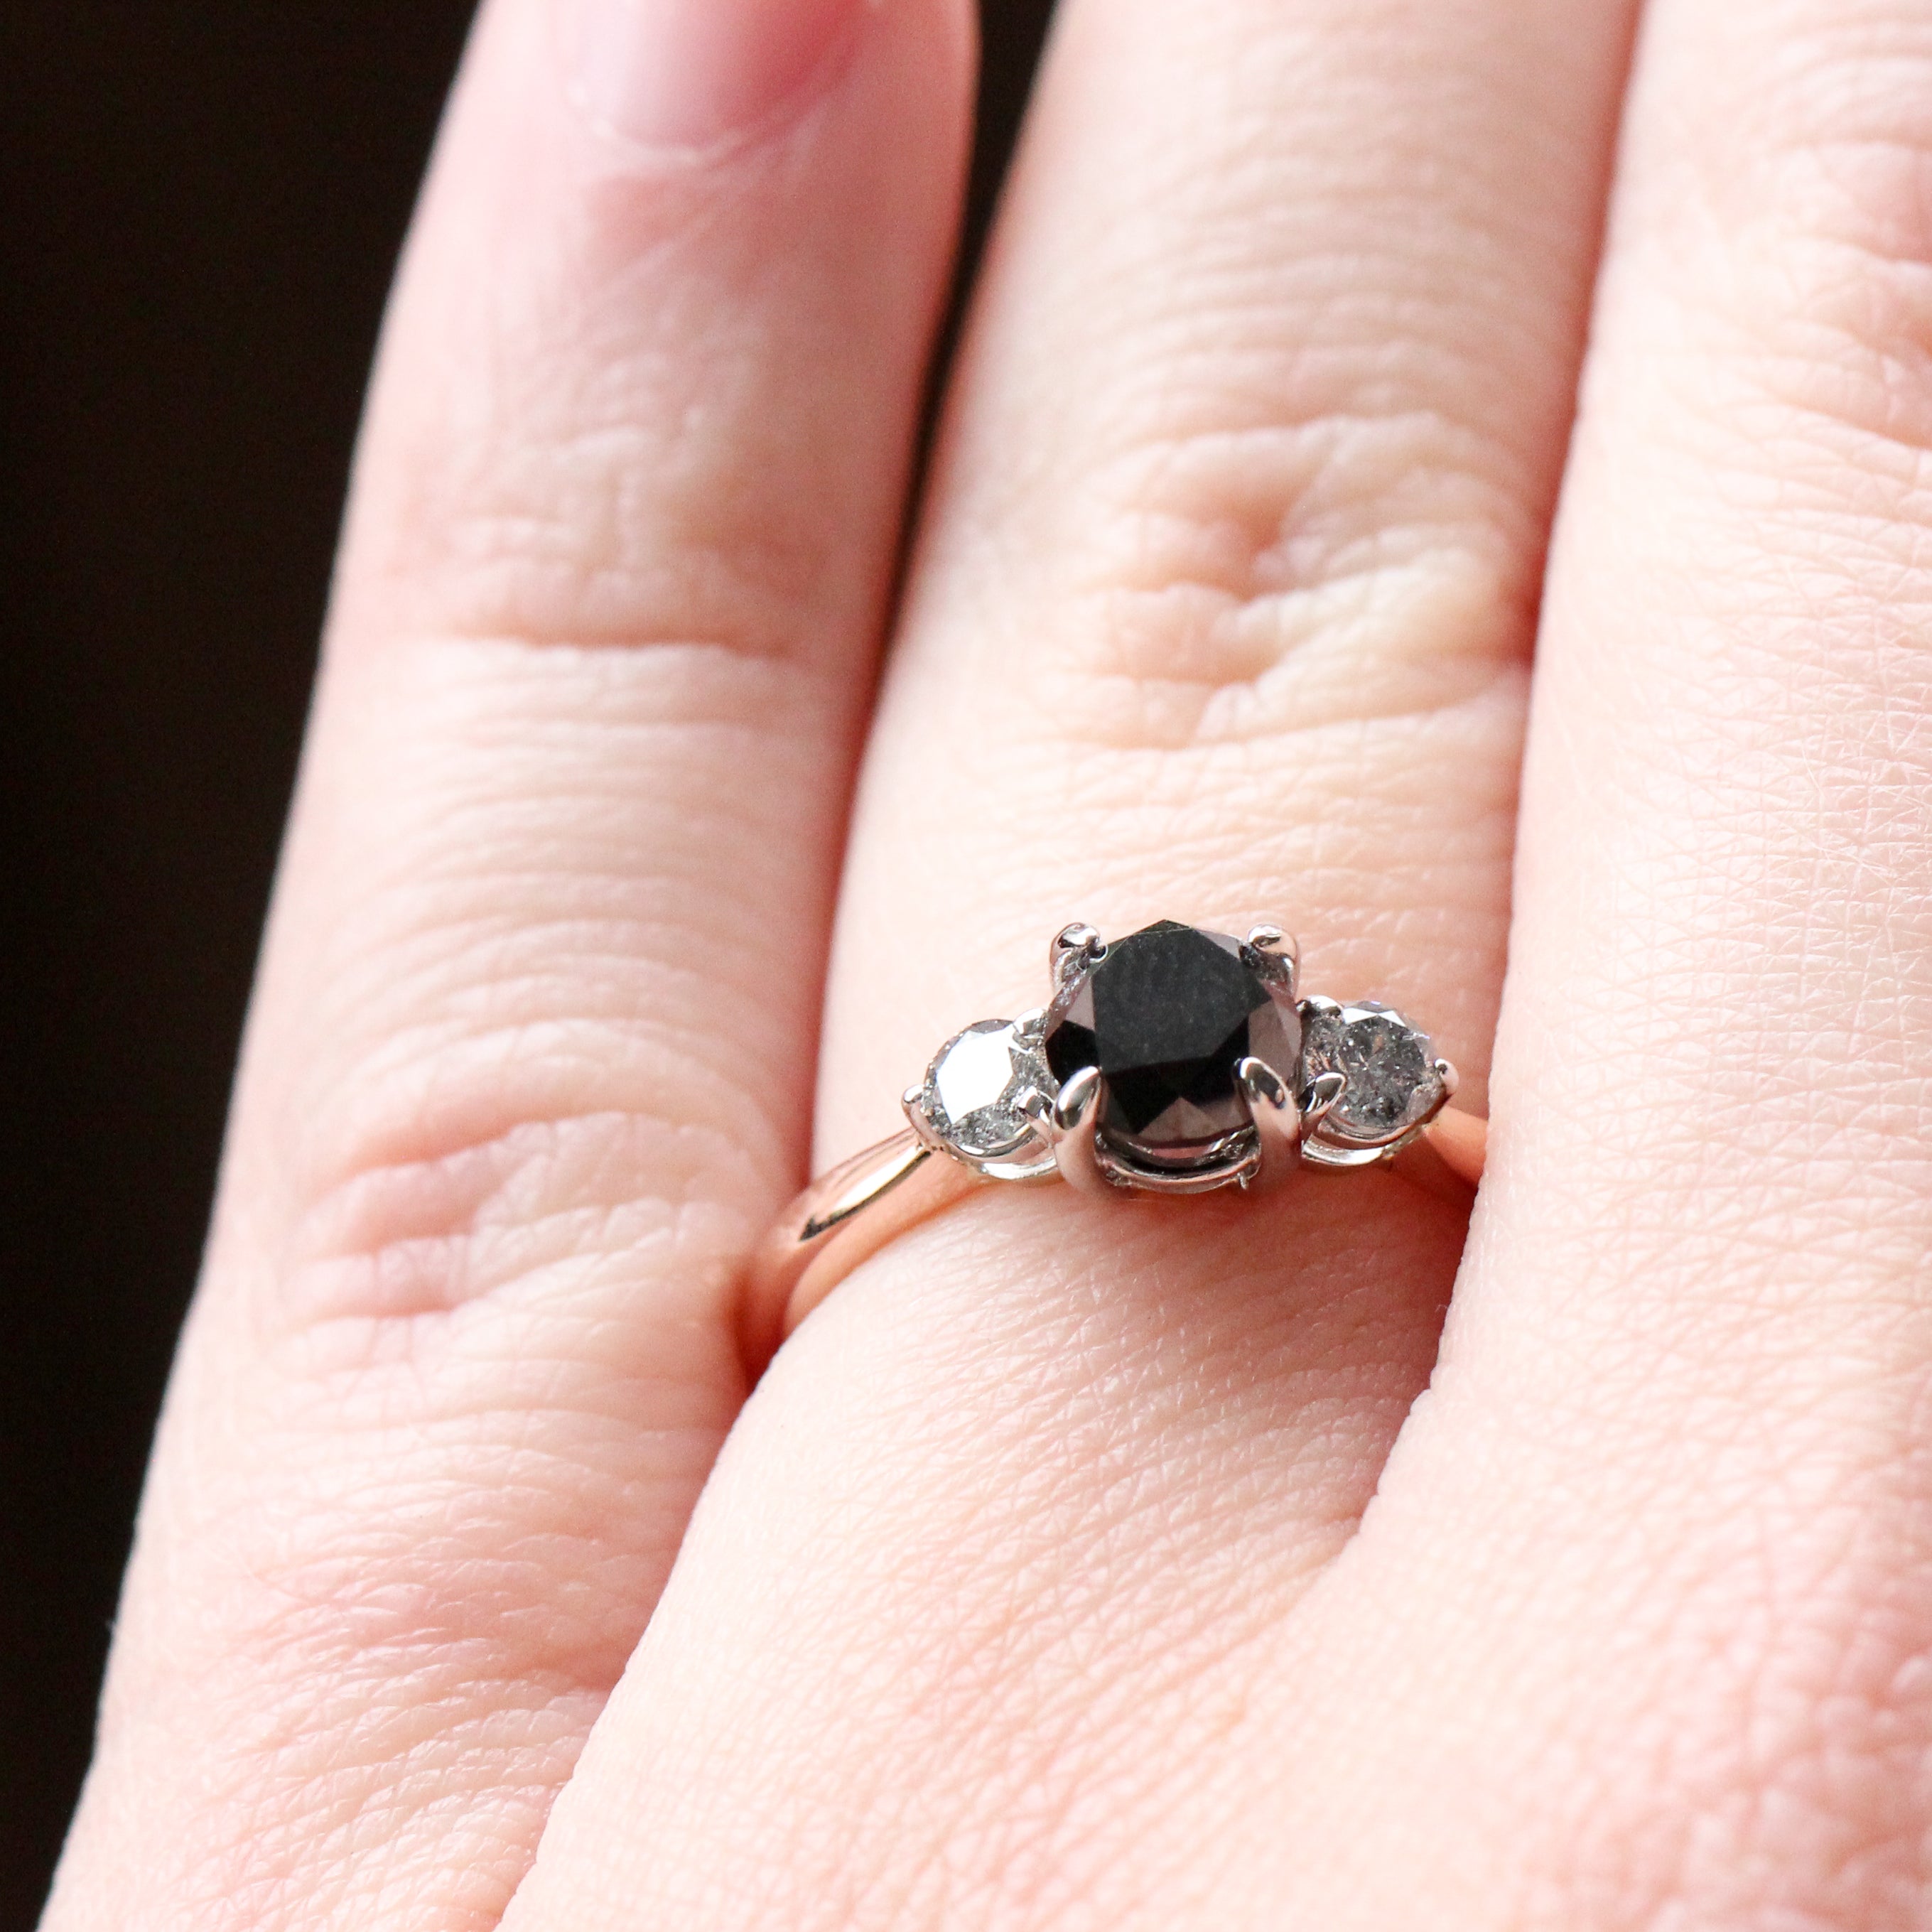 Olive Ring with a 1 Carat Black Diamond and Gray Salt and Pepper